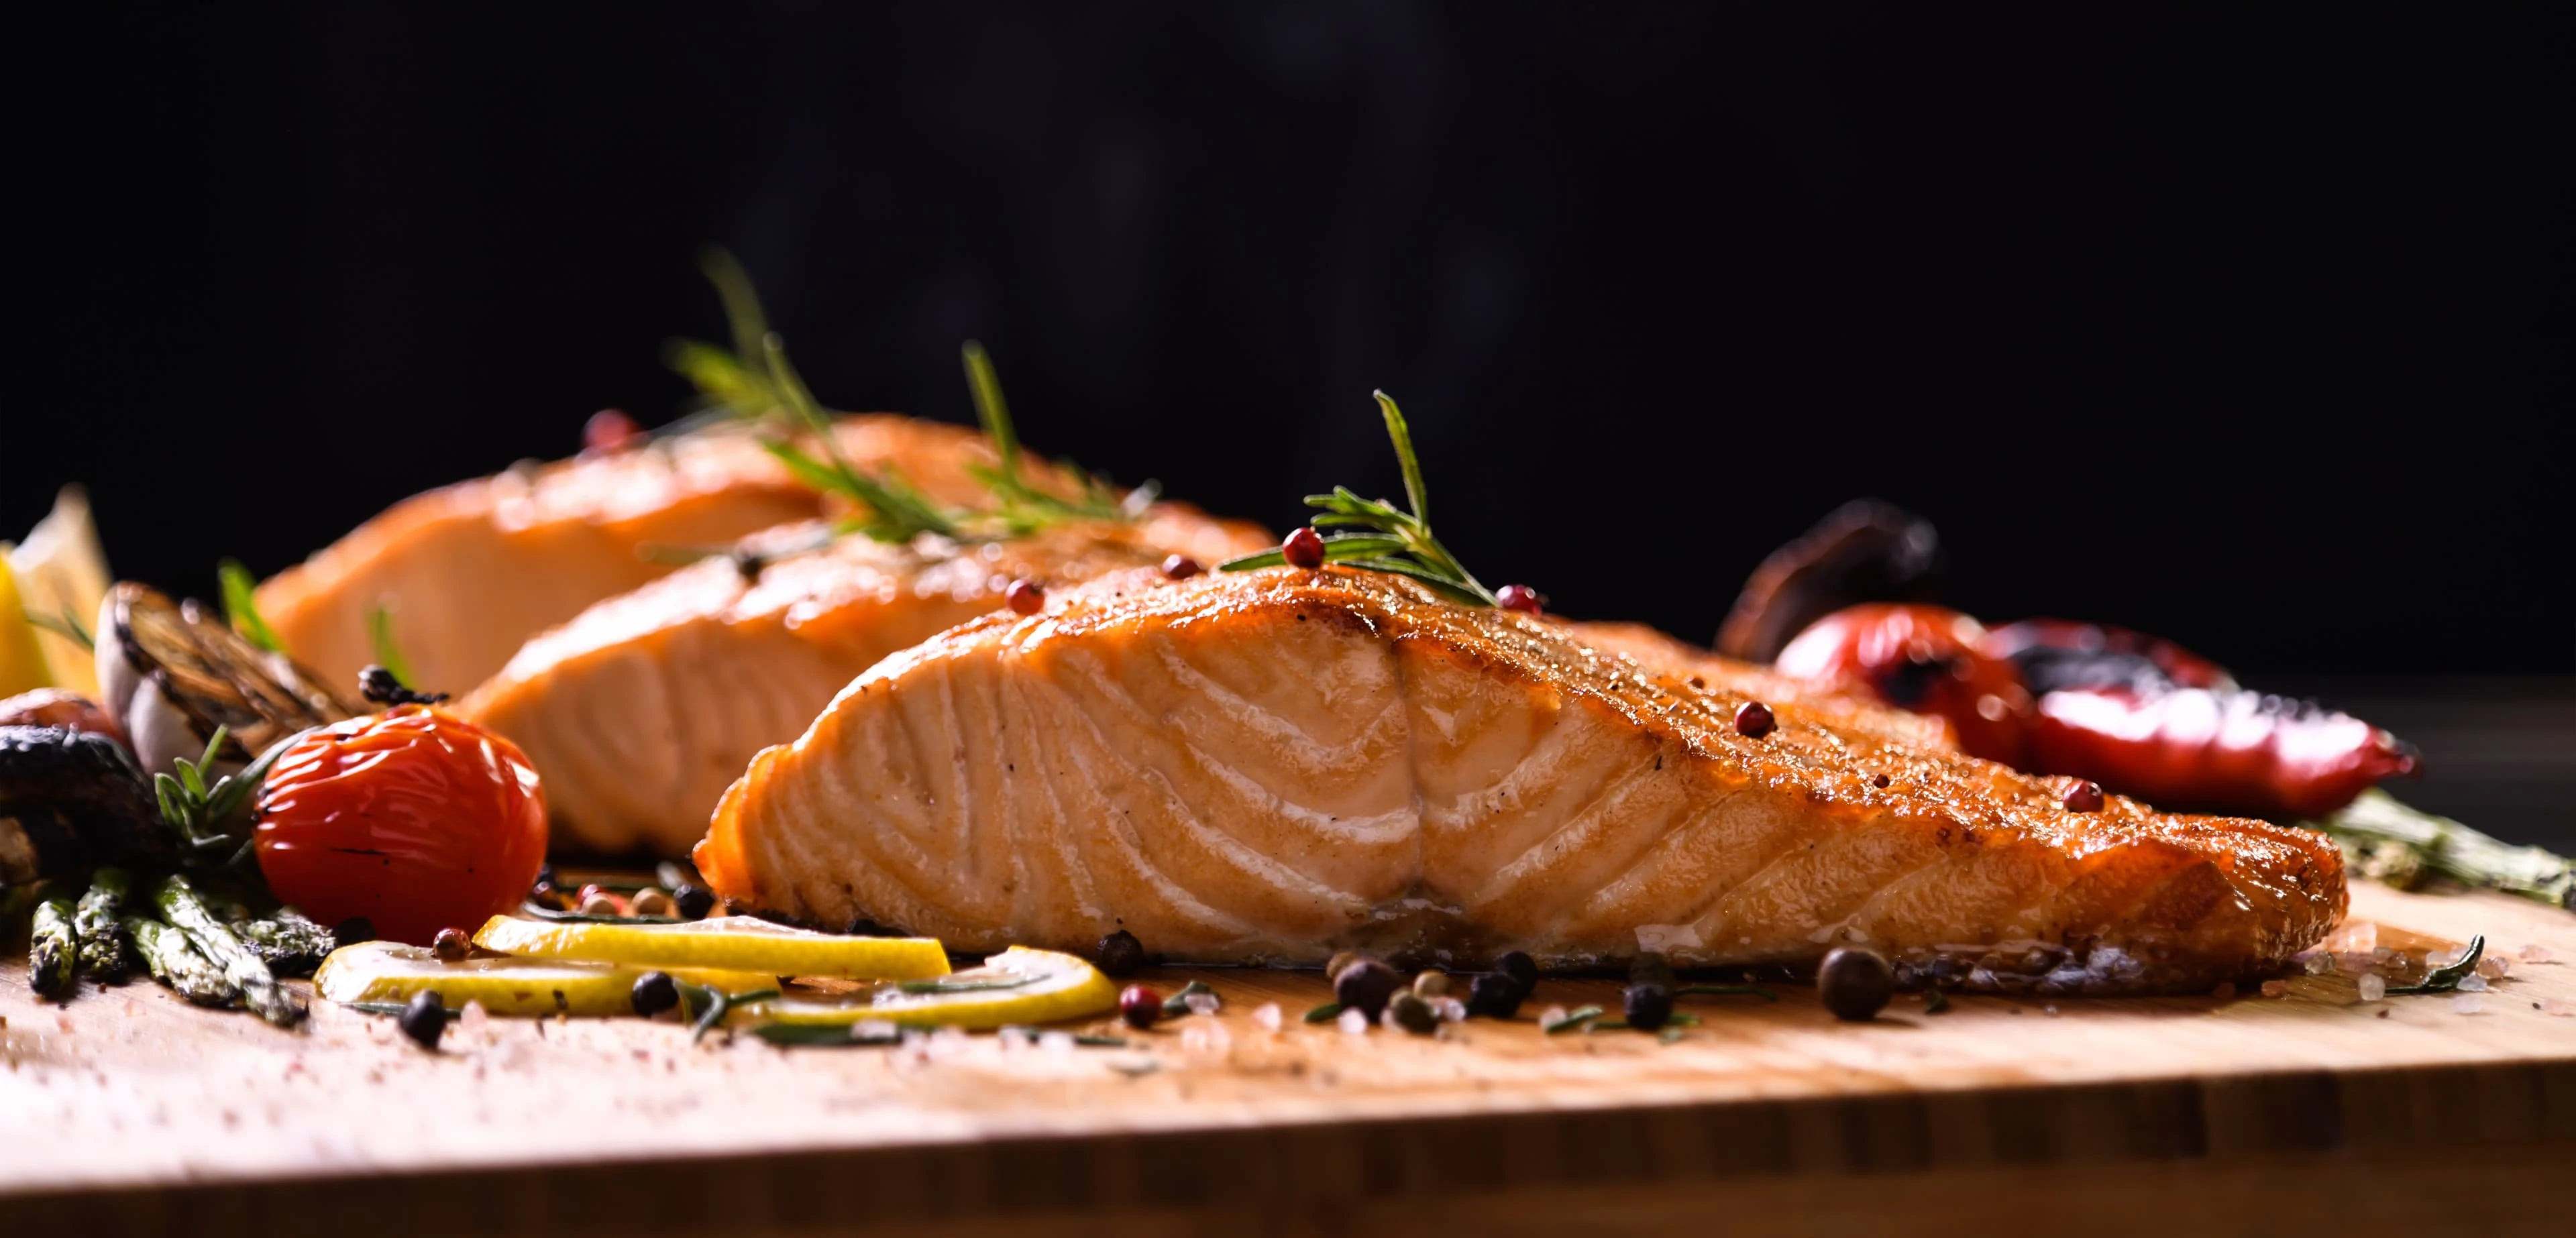 Grilled salmon fish on wooden table